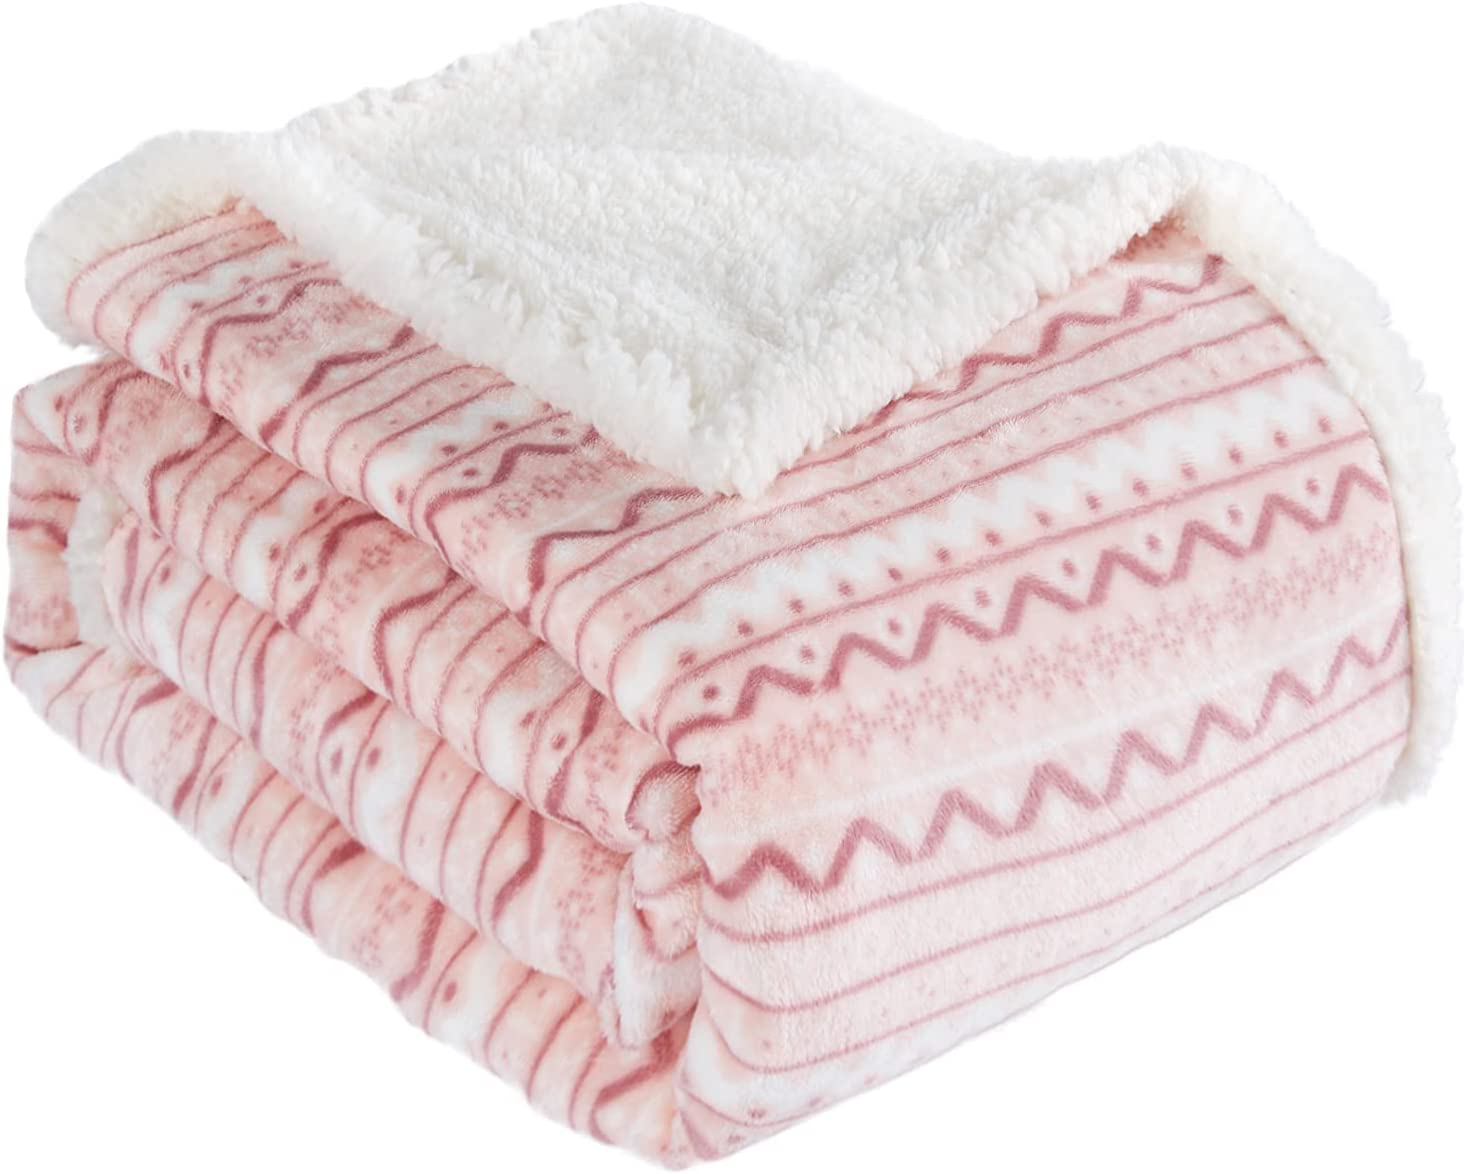 China Cheap price Minky Fabric Super Soft Plush - Sherpa Fleece Throw Blanket for Young Girls Super Soft Fuzzy Cozy Plush Pink Sherpa Plush Throw Blanket for Kids Children Teens or Adult for Sofa ...